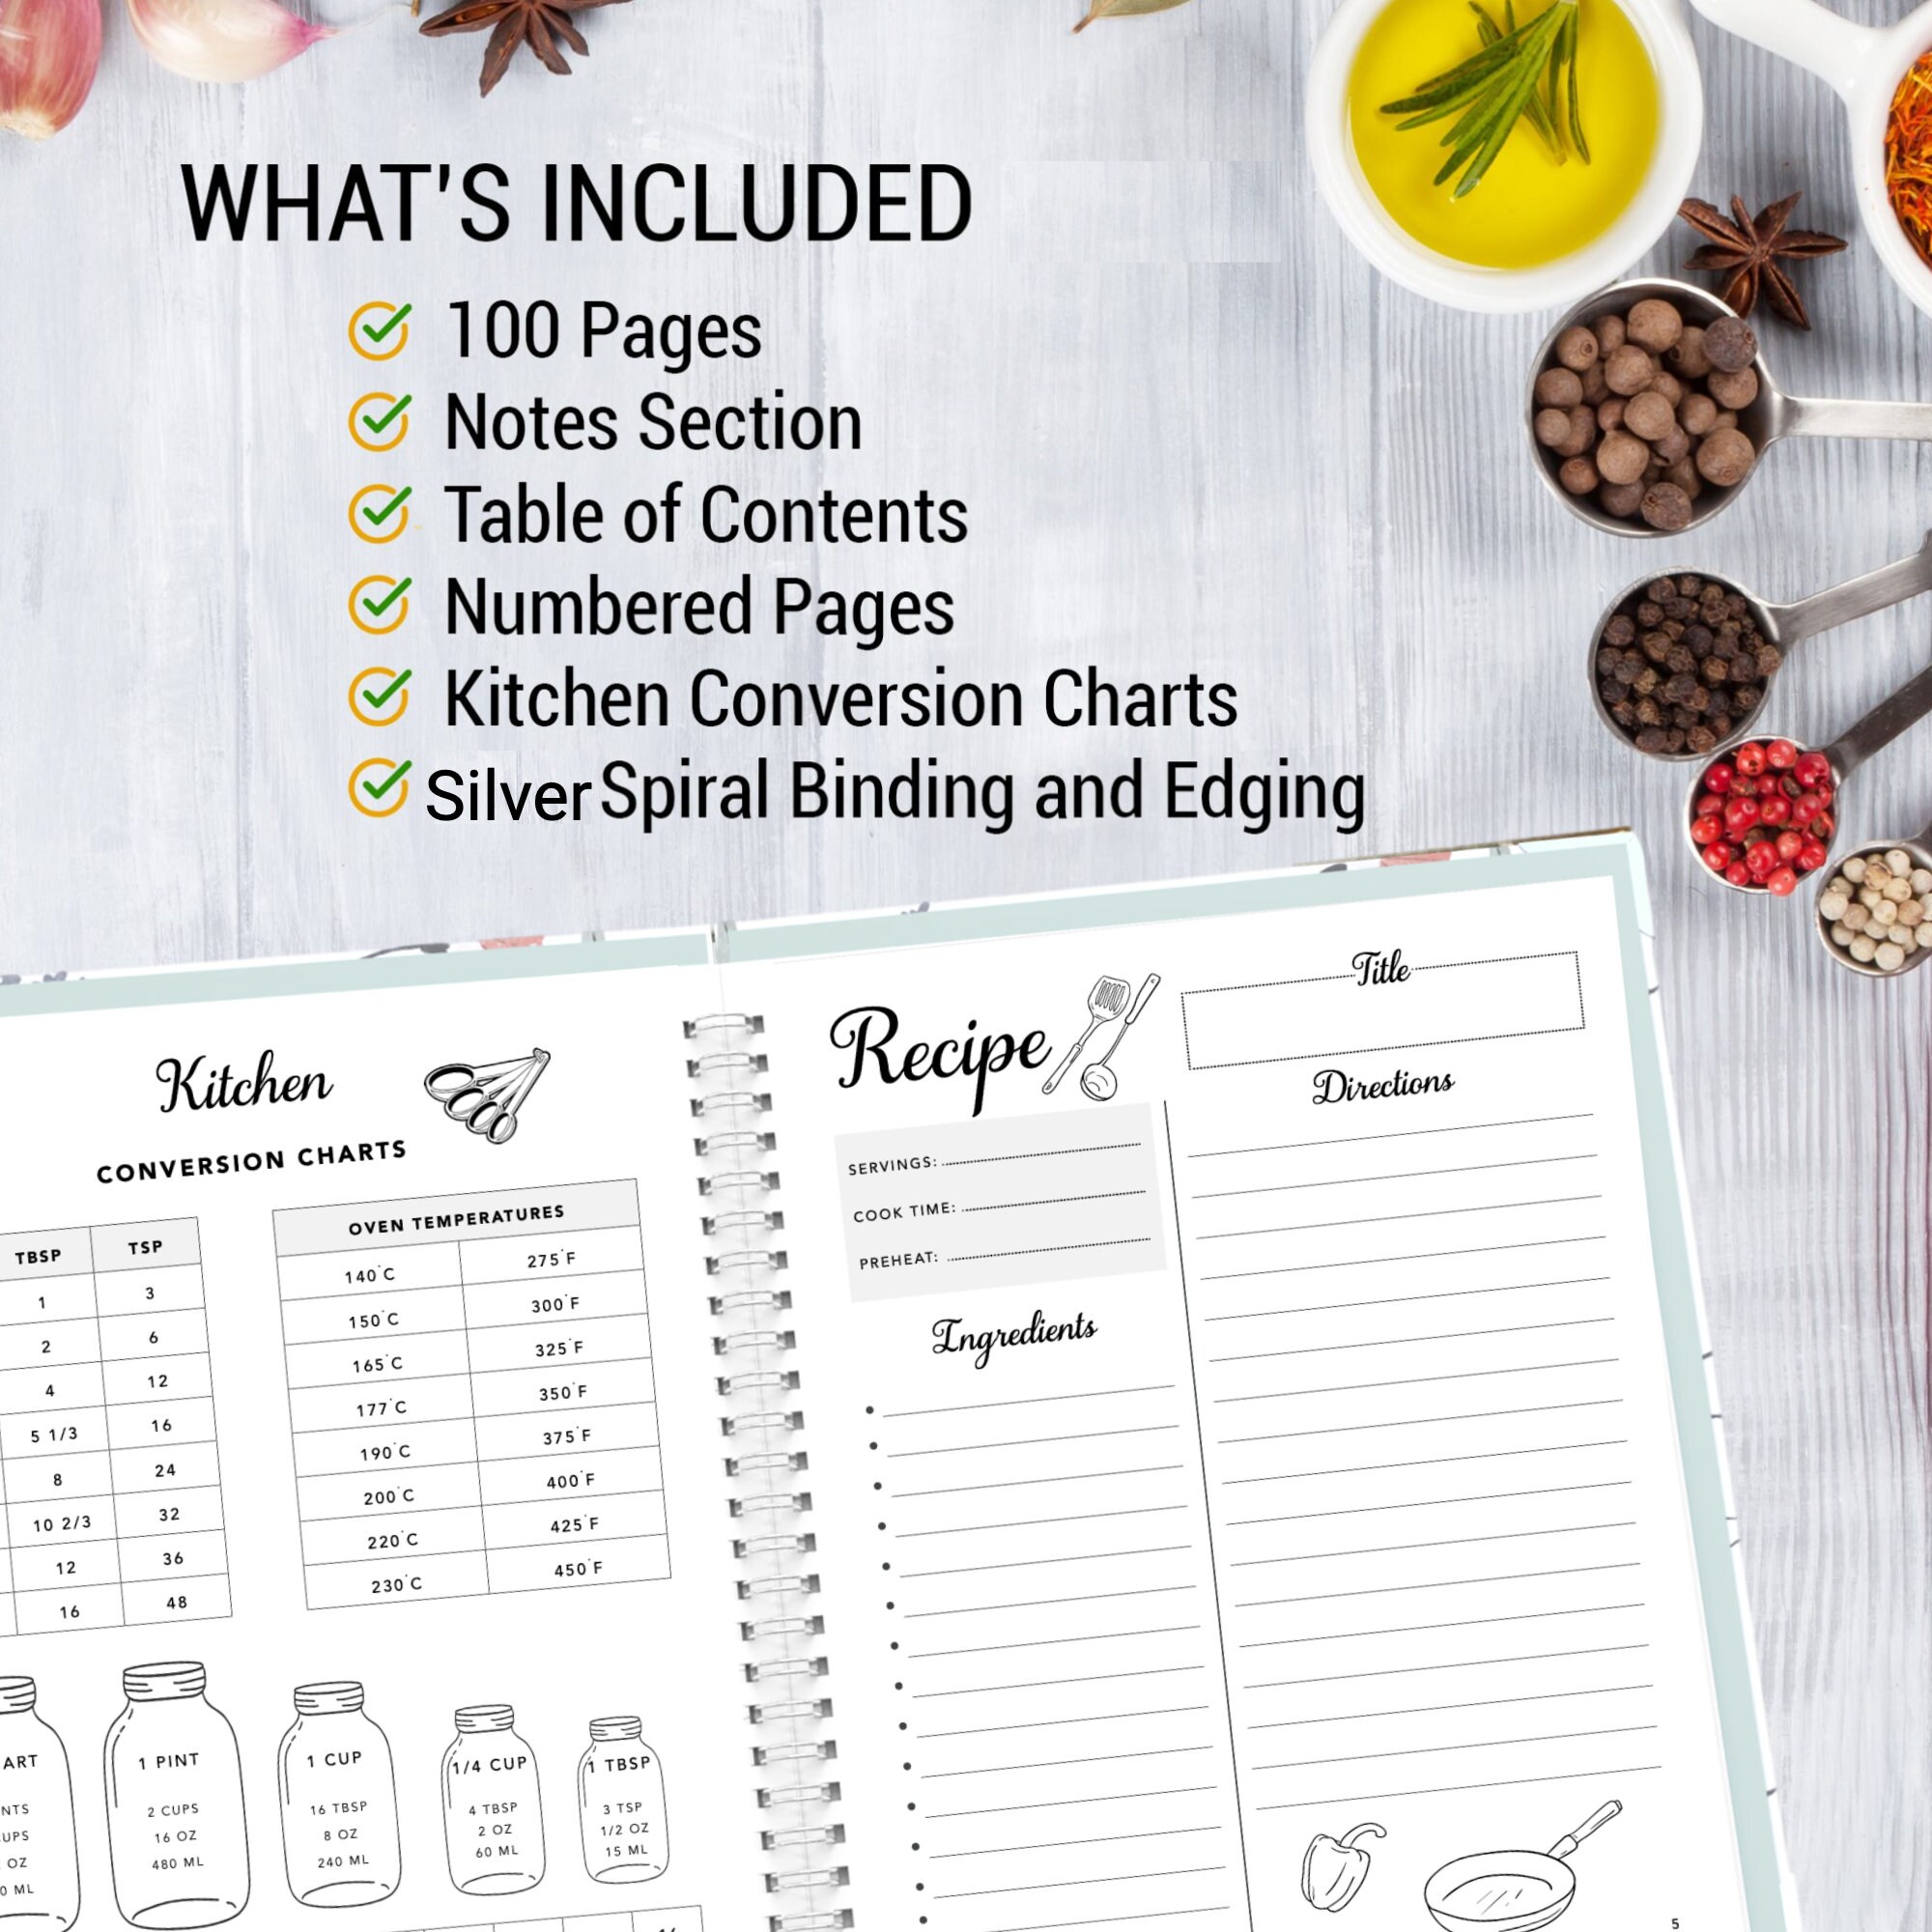 Blank Recipe Book to Write in Your Own Recipes - Family Recipe Journal to Create Your Own Cookbook - 100 Page Recipe Notebook with Conversion Charts